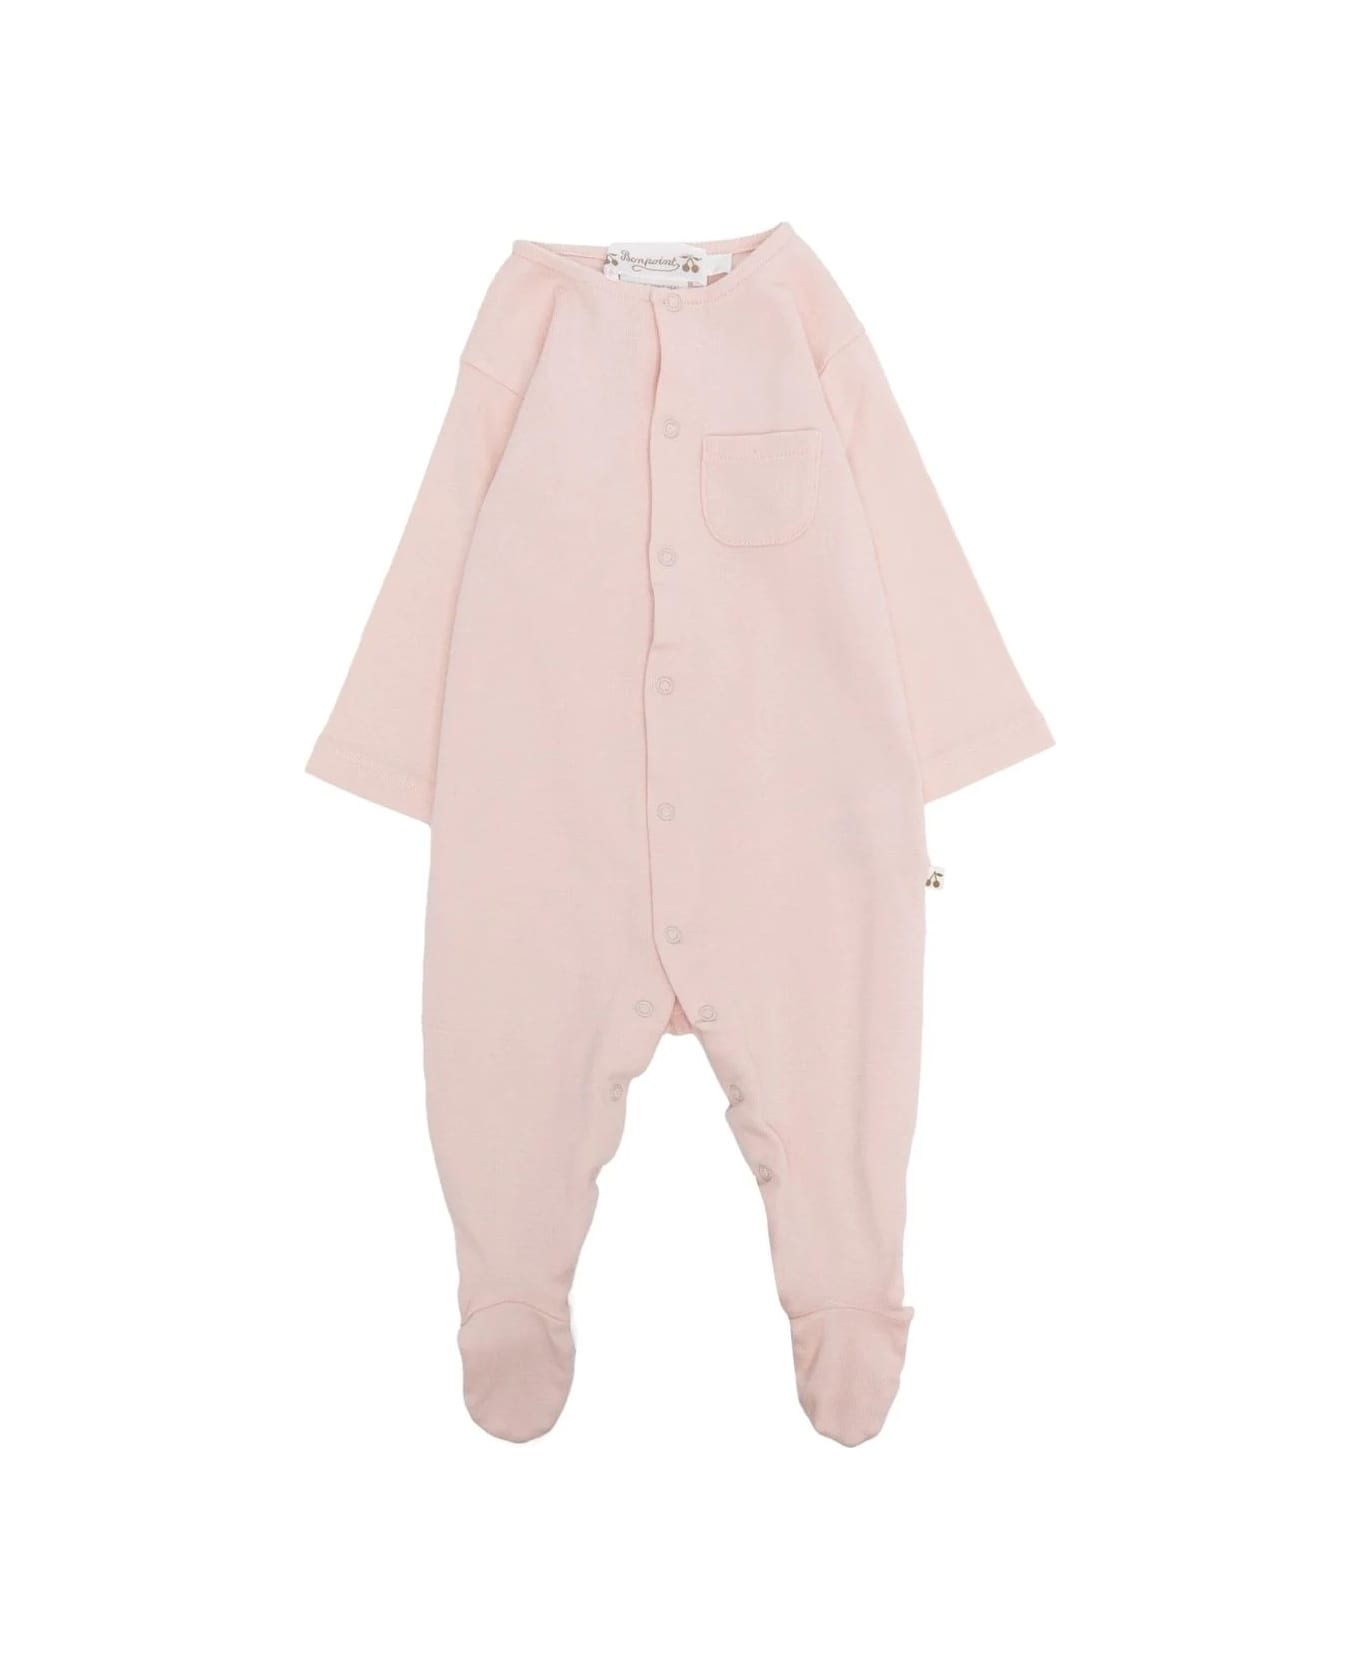 Bonpoint Cosima Pajamas Set In Faded Pink - Pink